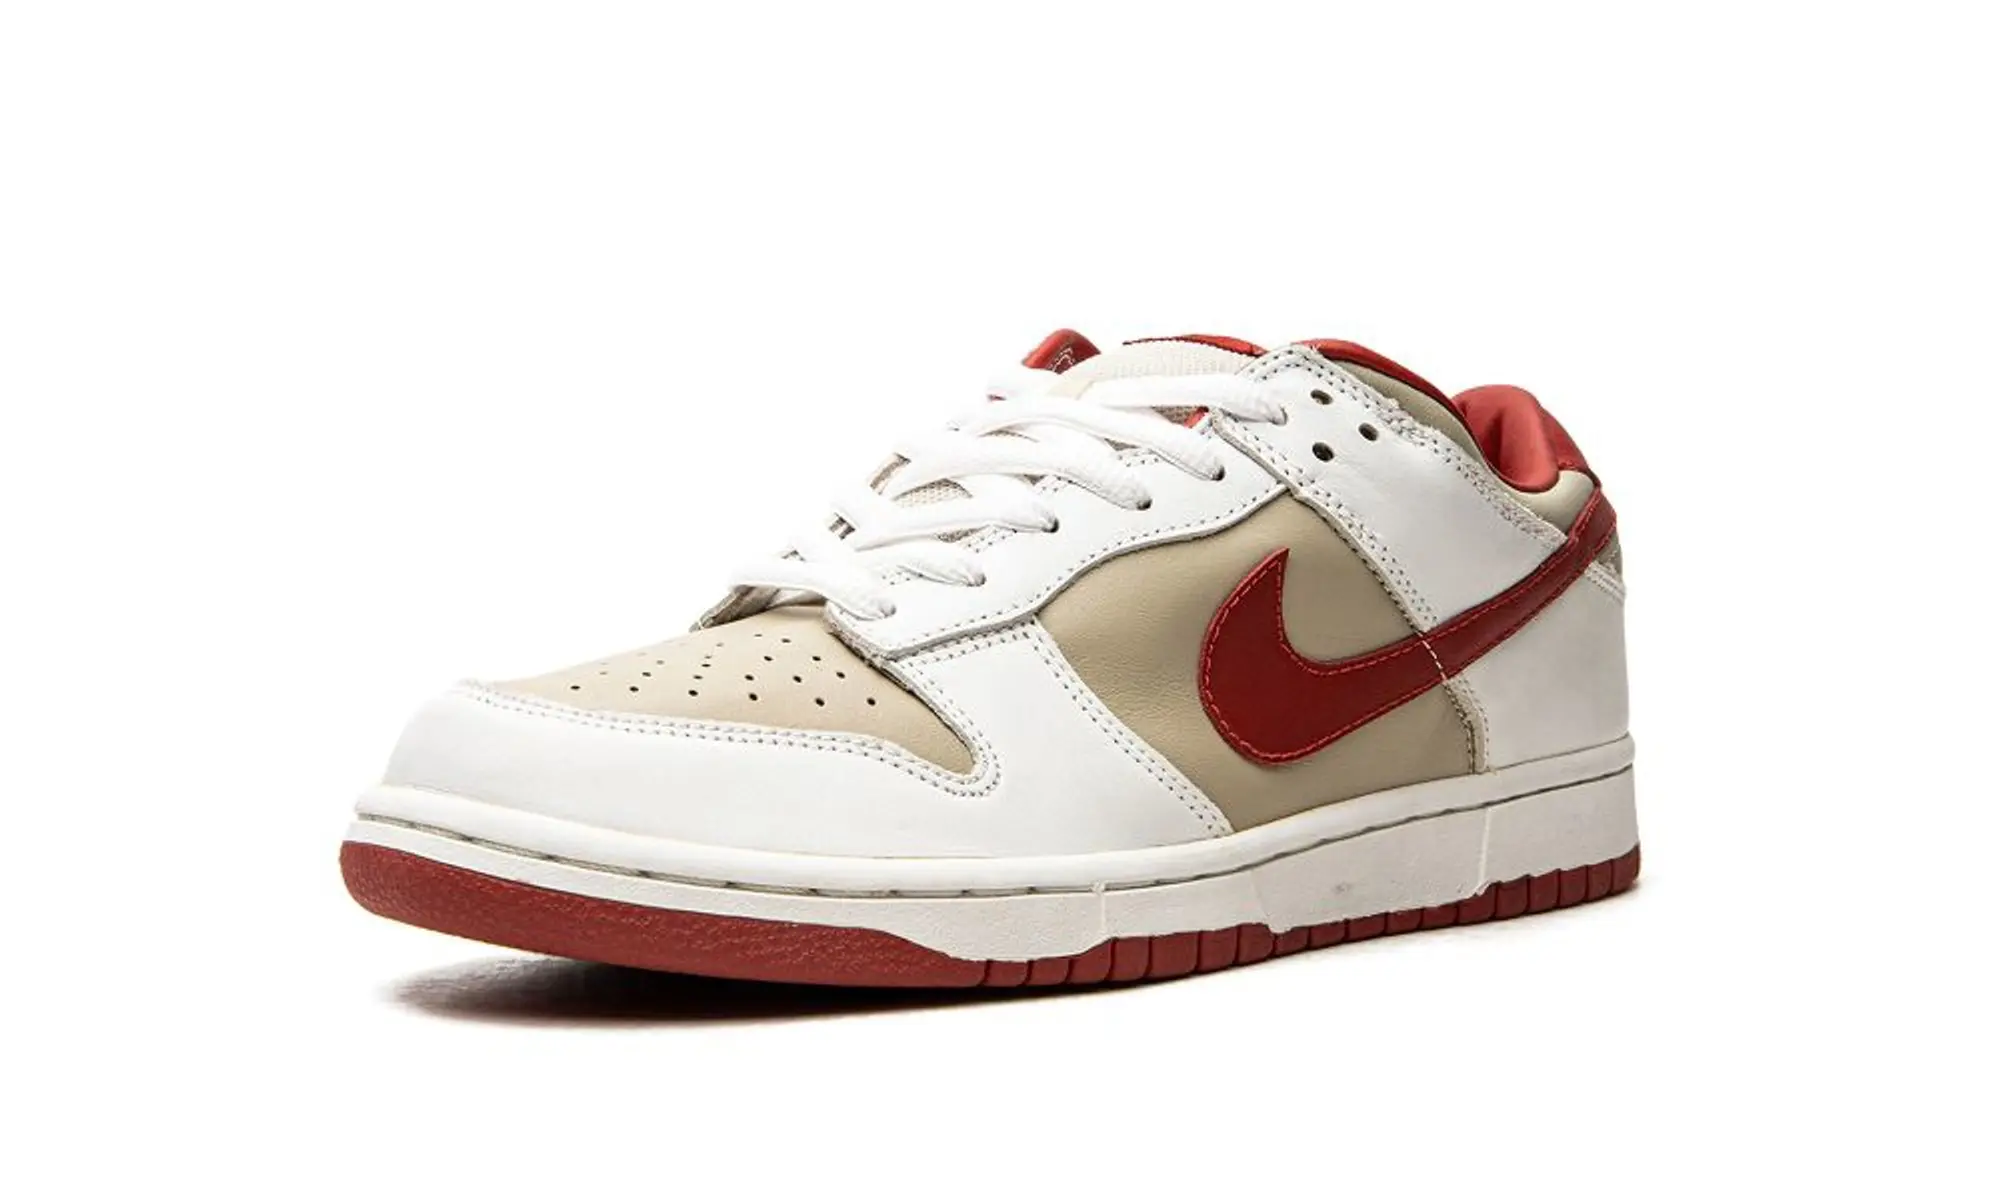 Nike Womens Dunk Low Pro Light Stone Varsity Red Shoes